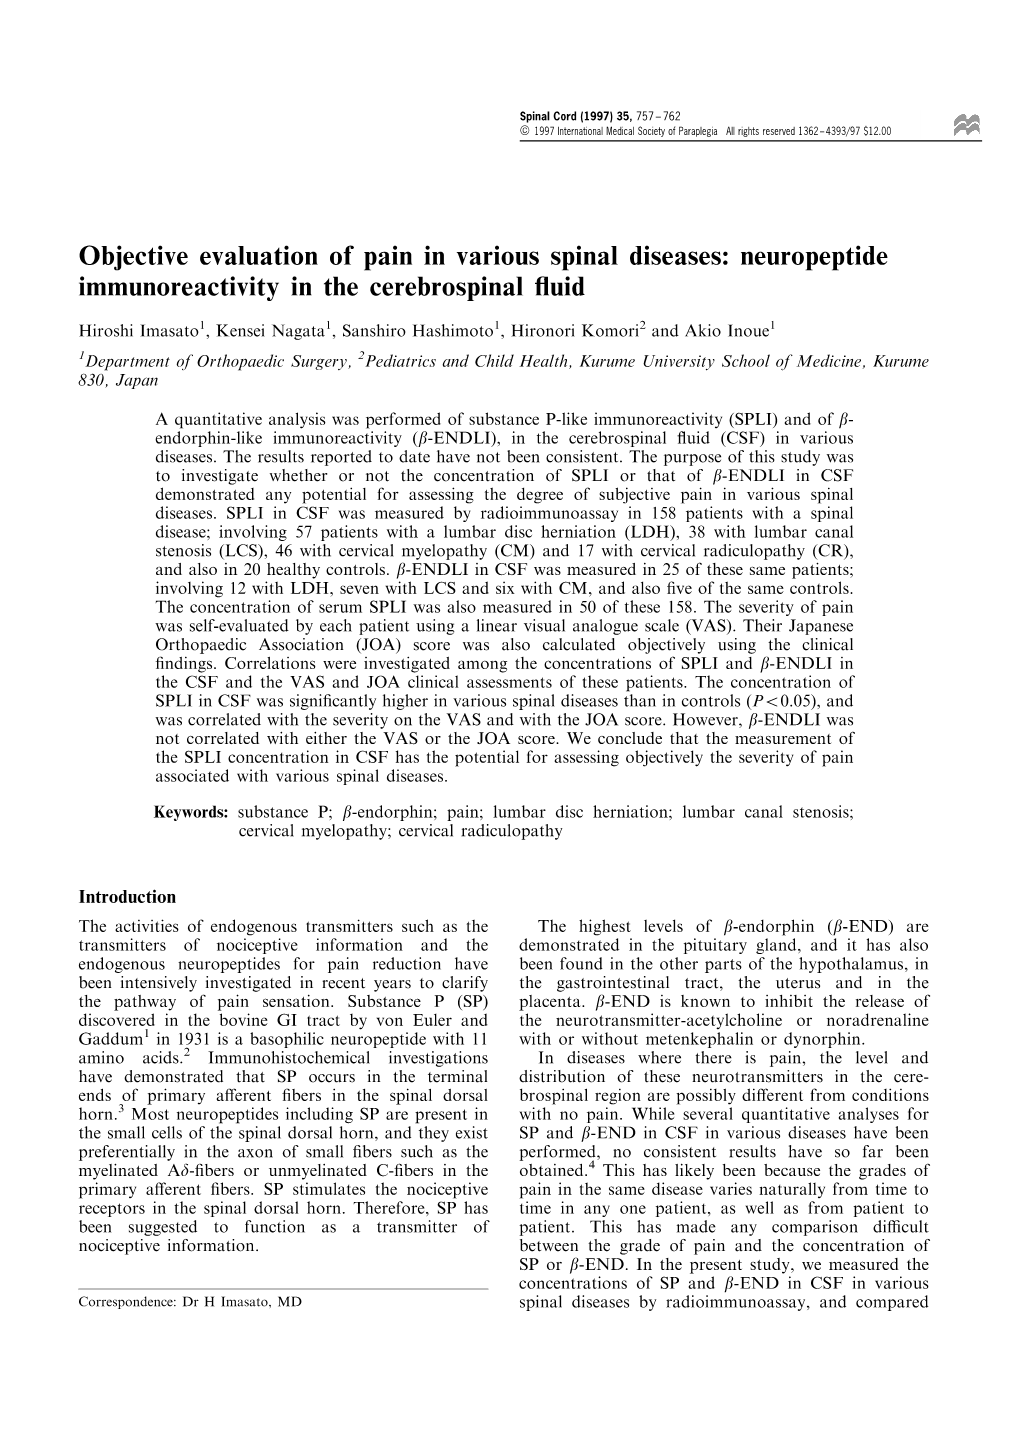 Objective Evaluation of Pain in Various Spinal Diseases: Neuropeptide Immunoreactivity in the Cerebrospinal ¯Uid